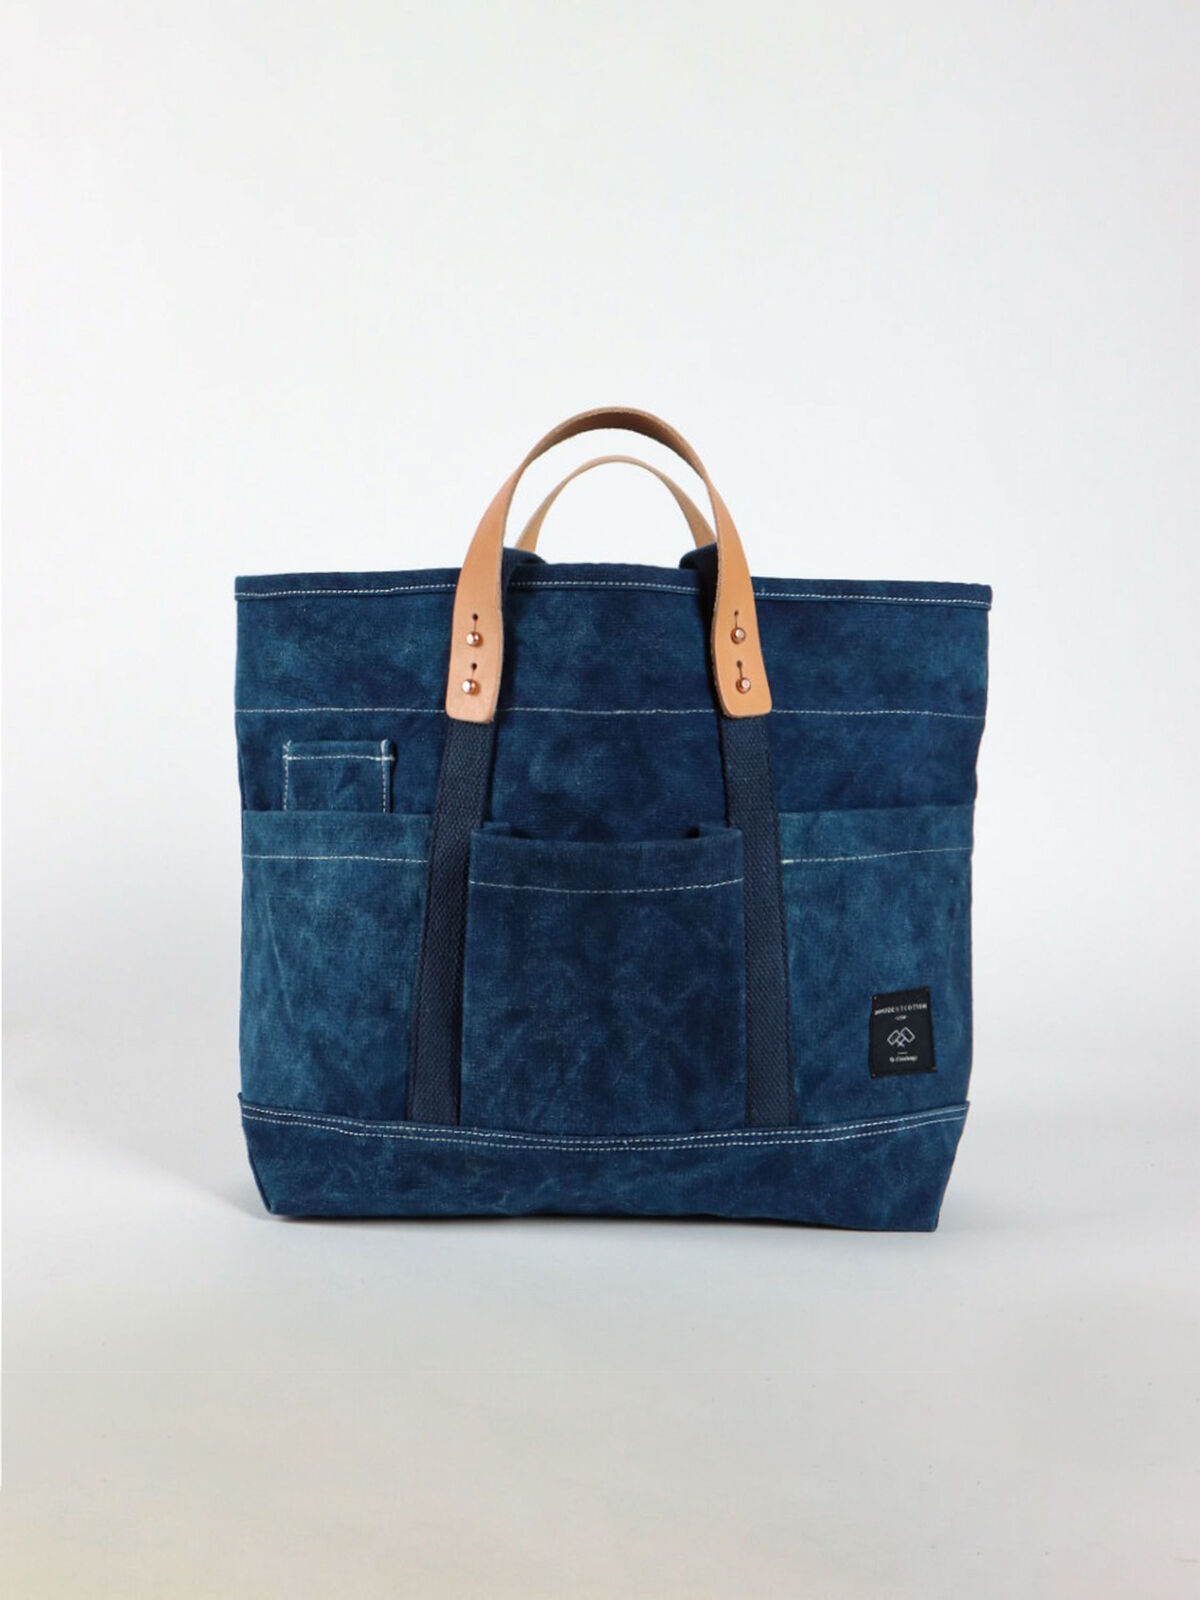 Immodest Cotton - Construction Tote